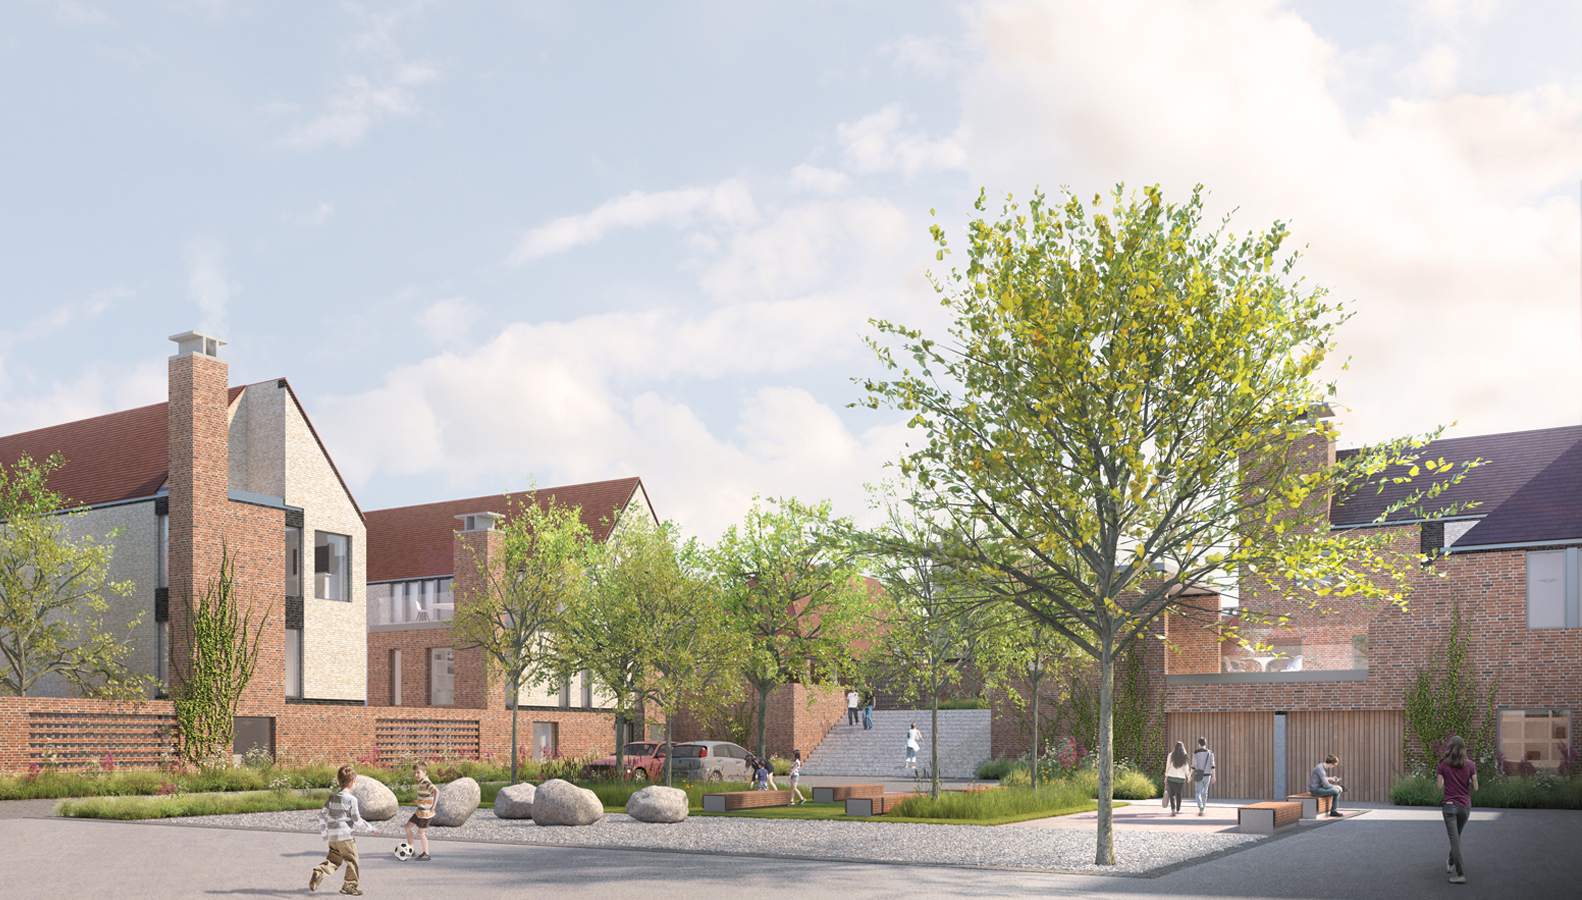 a 140-home ‘garden city’ development on the outskirts of Canterbury for detailed planning